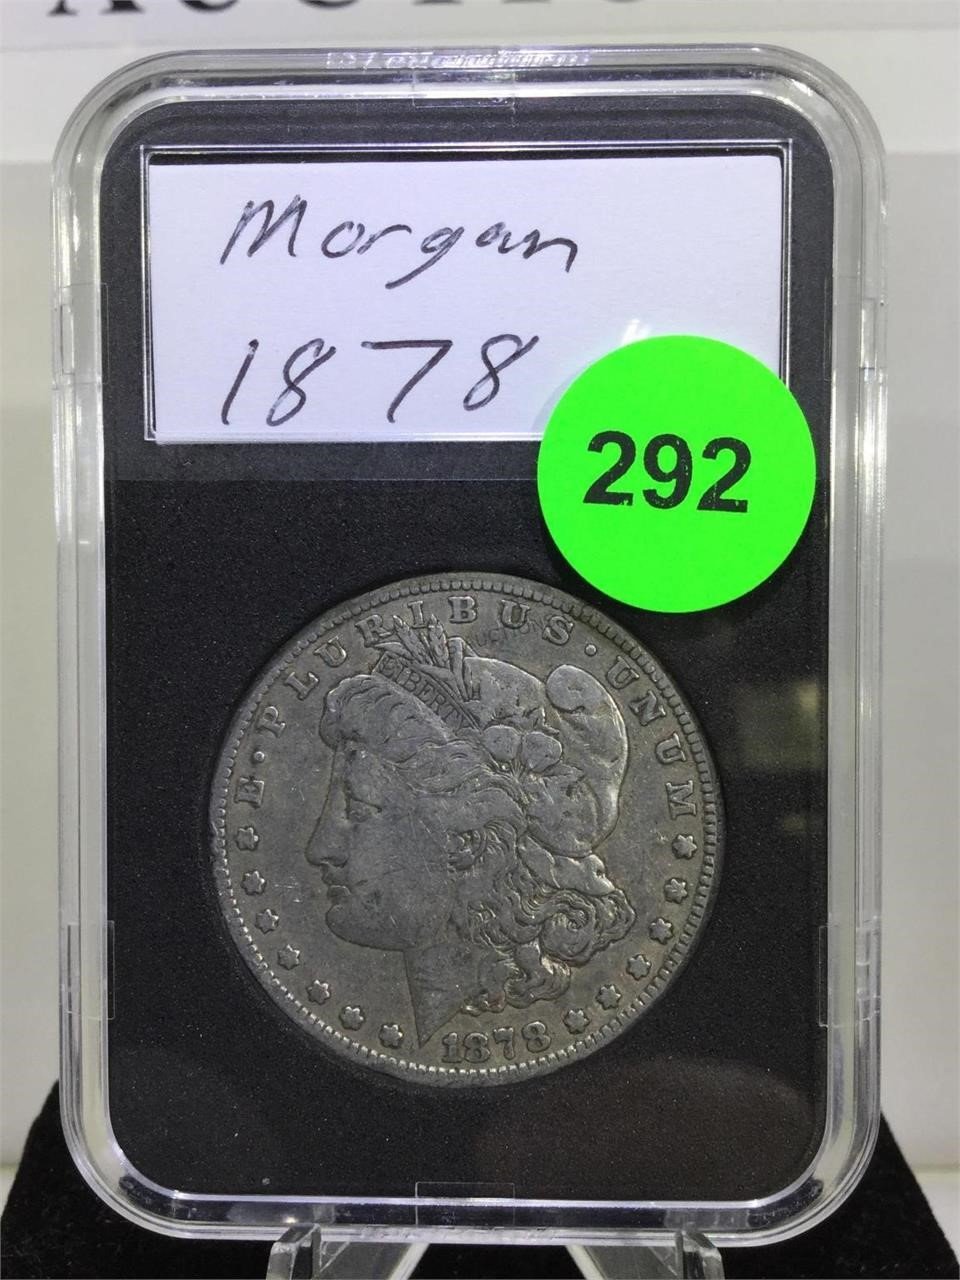 4/18/21 Sports - Collectibles - Coins - Furniture